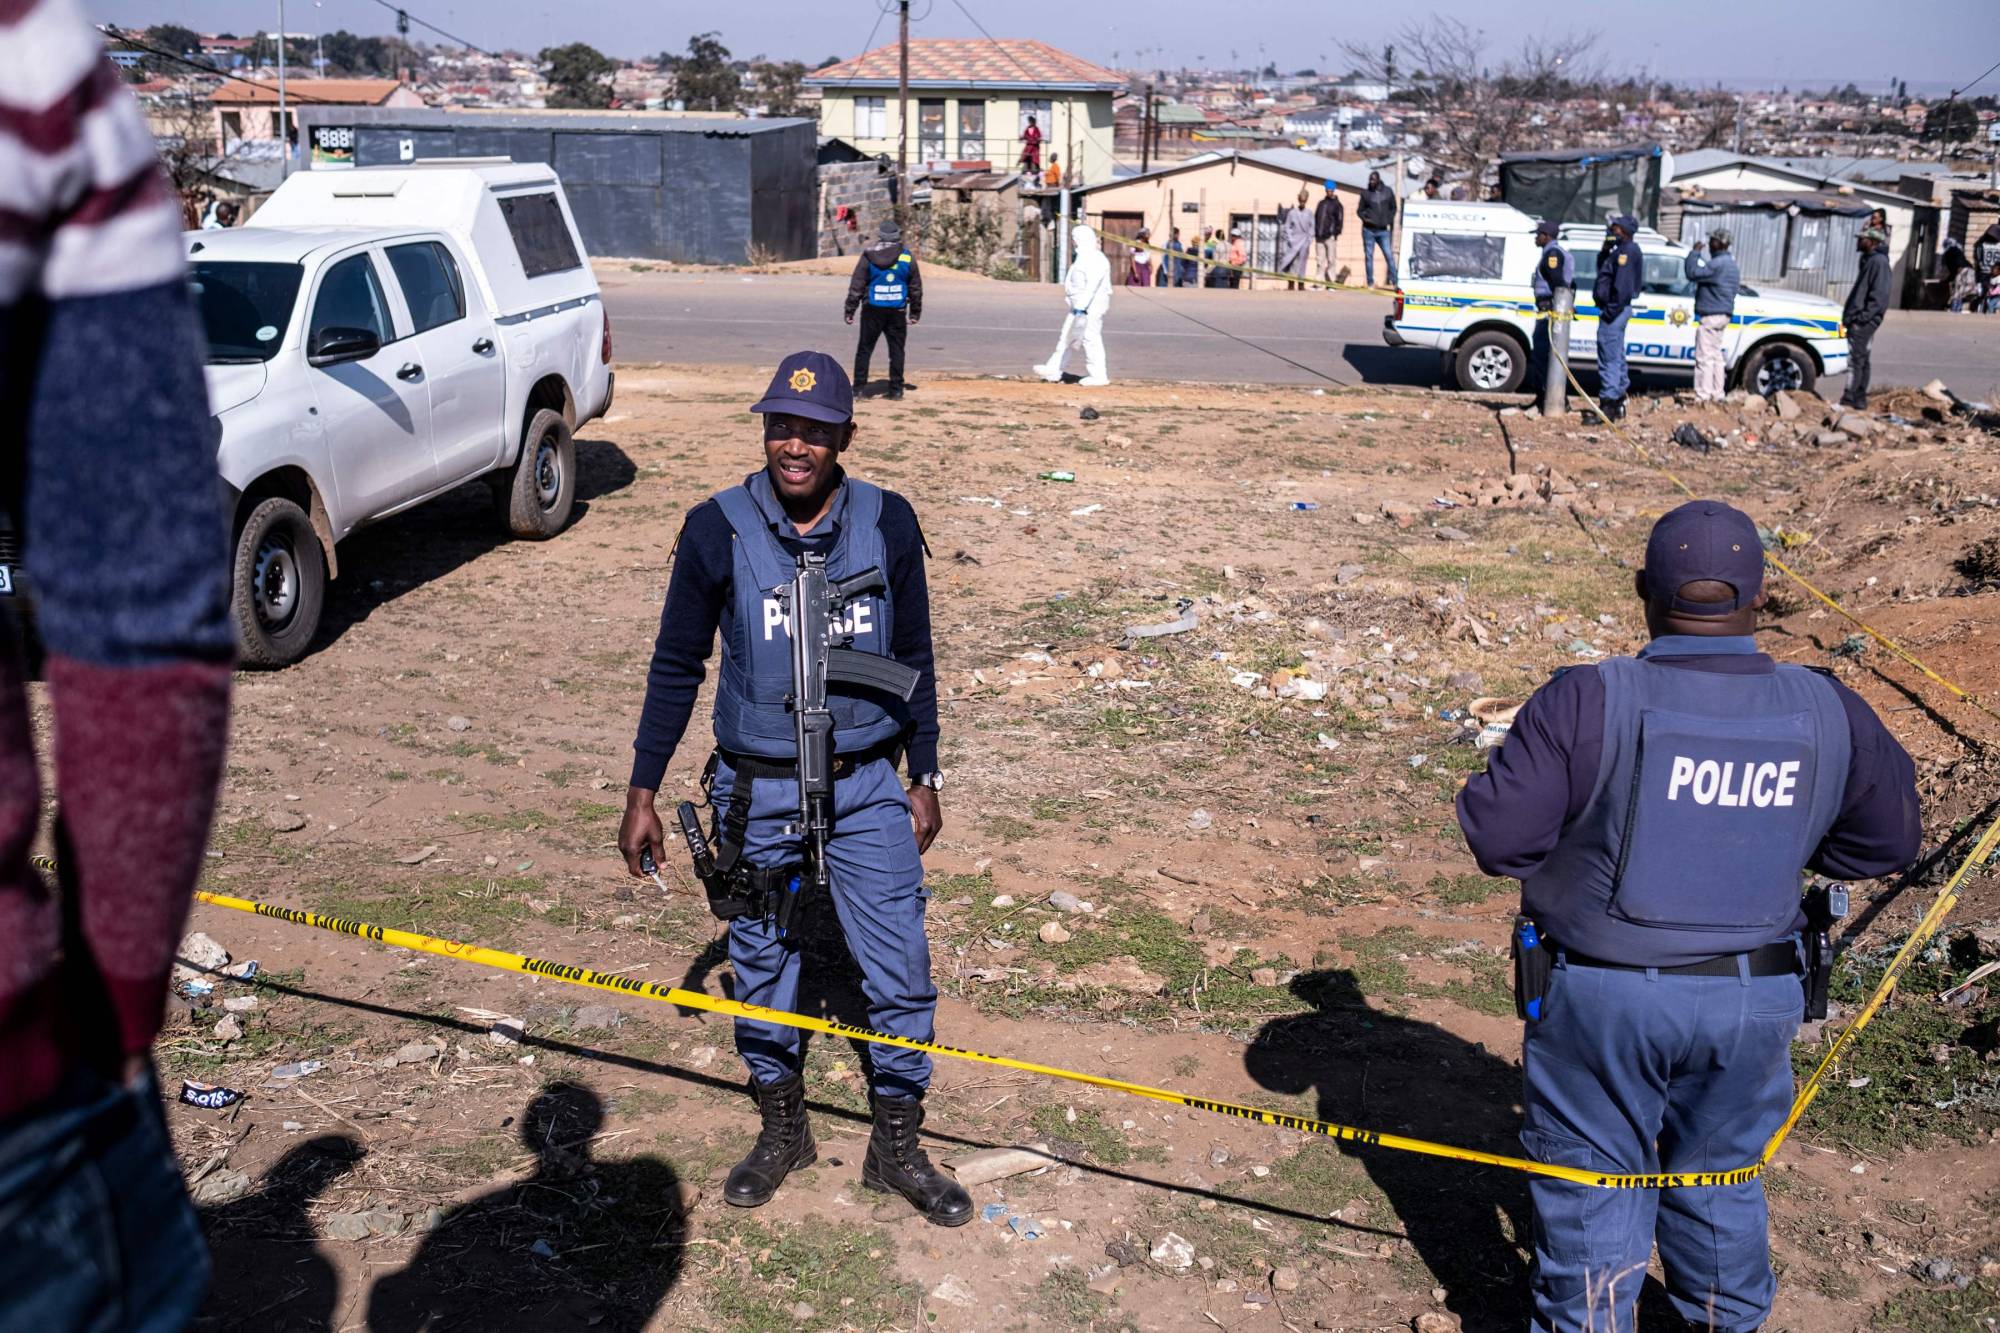 South African Police Service (SAPS) officers enforce a perimeter around a crime scene in South Africa